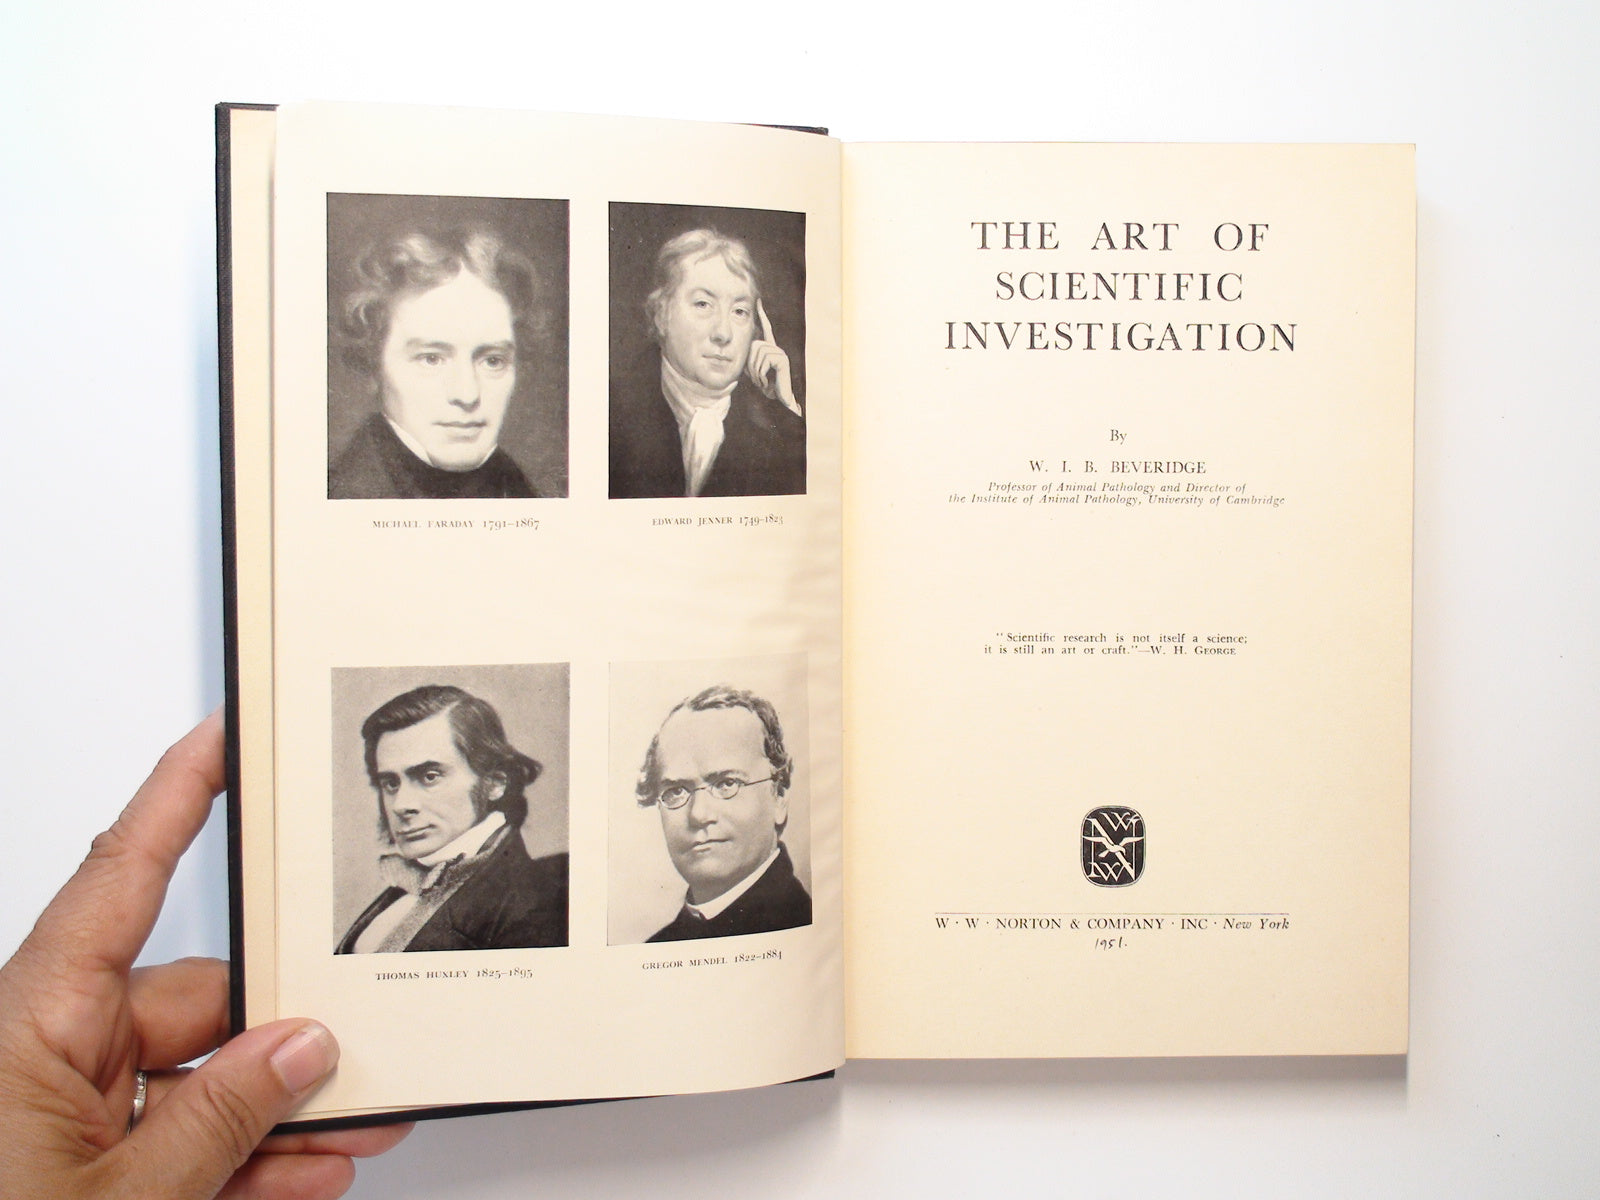 The Art of Scientific Investigation, by W. I. B. Beveridge, Illustrated, 1951